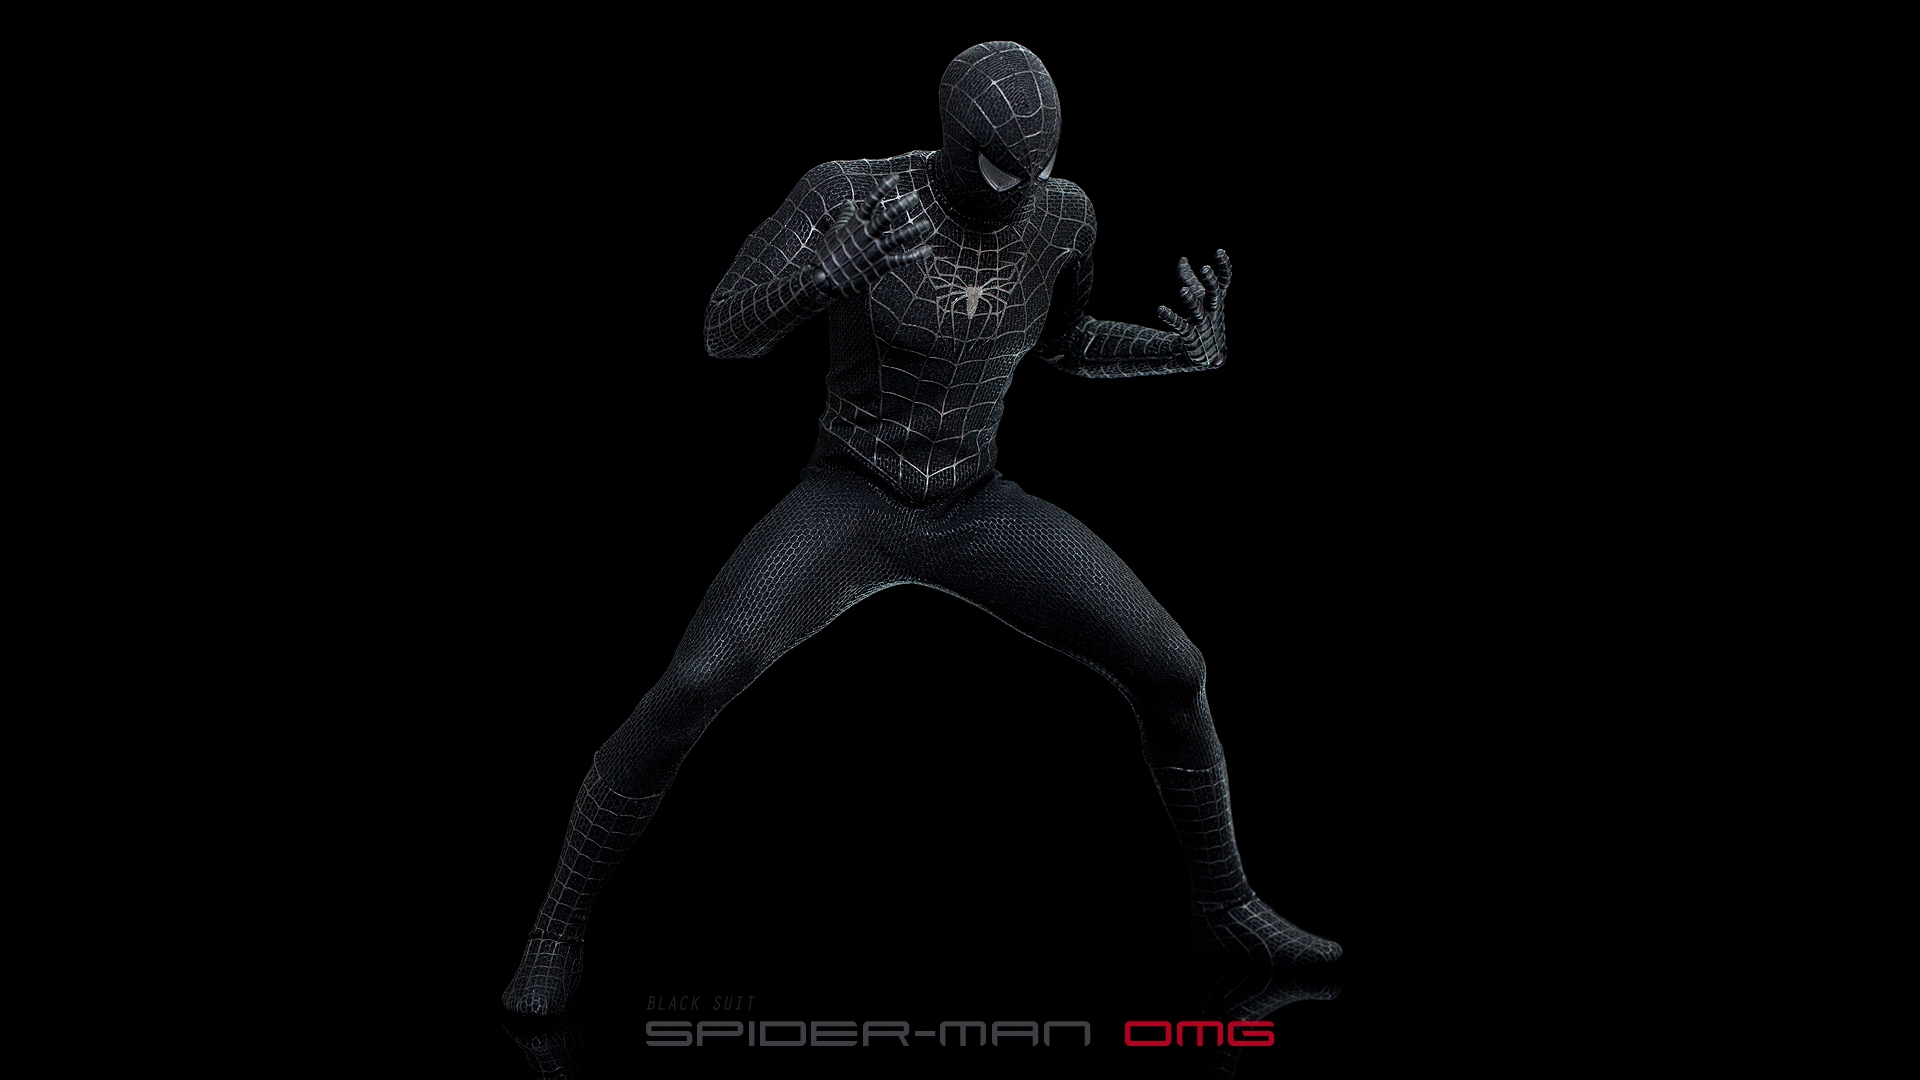  Black  Spiderman Iphone Backgrounds Download Free 